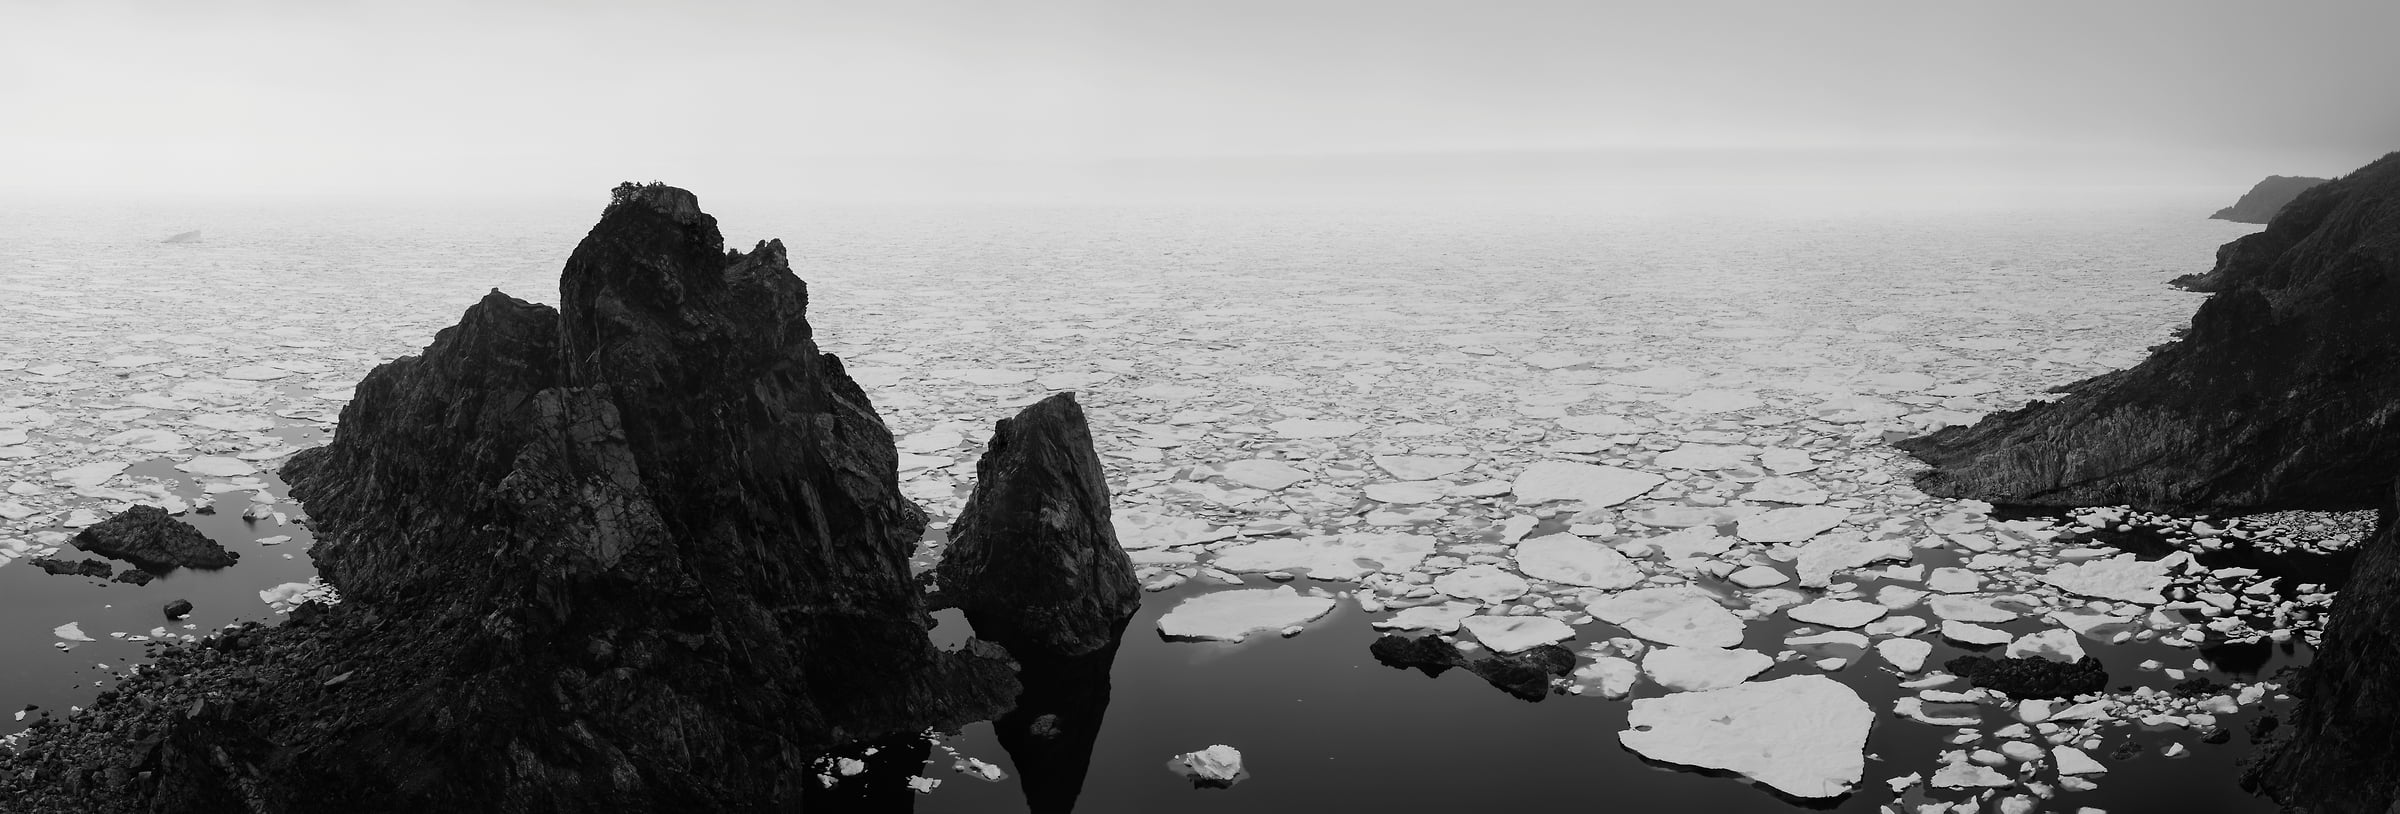 1,580 megapixels! A very high resolution, large-format VAST photo of ice and icebergs floating in an ocean bay; black & white fine art landscape photo created by Scott Dimond in La Scie, Newfoundland, Canada